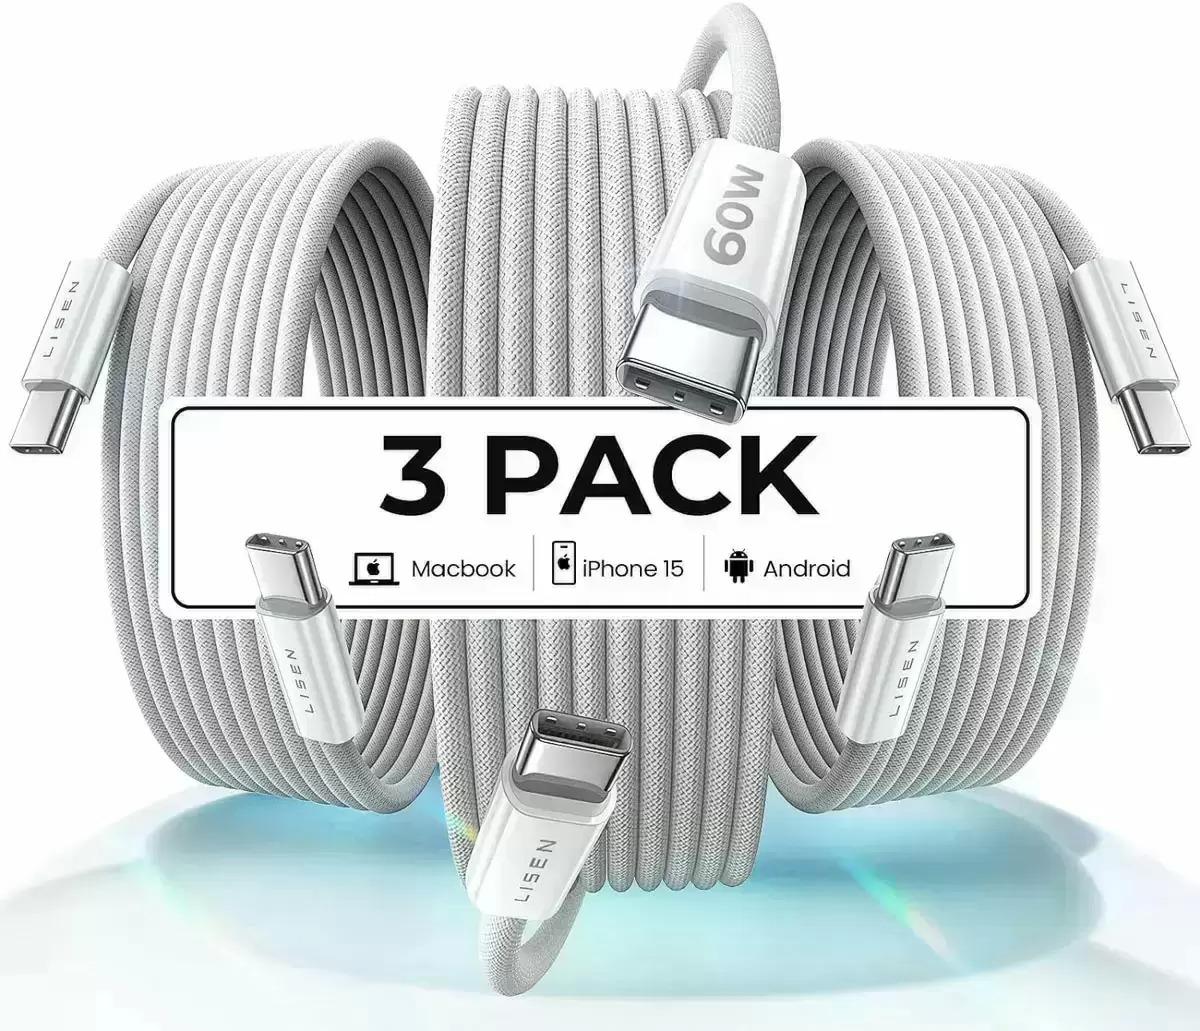 USB-C 6ft Charge Cables by Lisen 3 Pack for $4.96